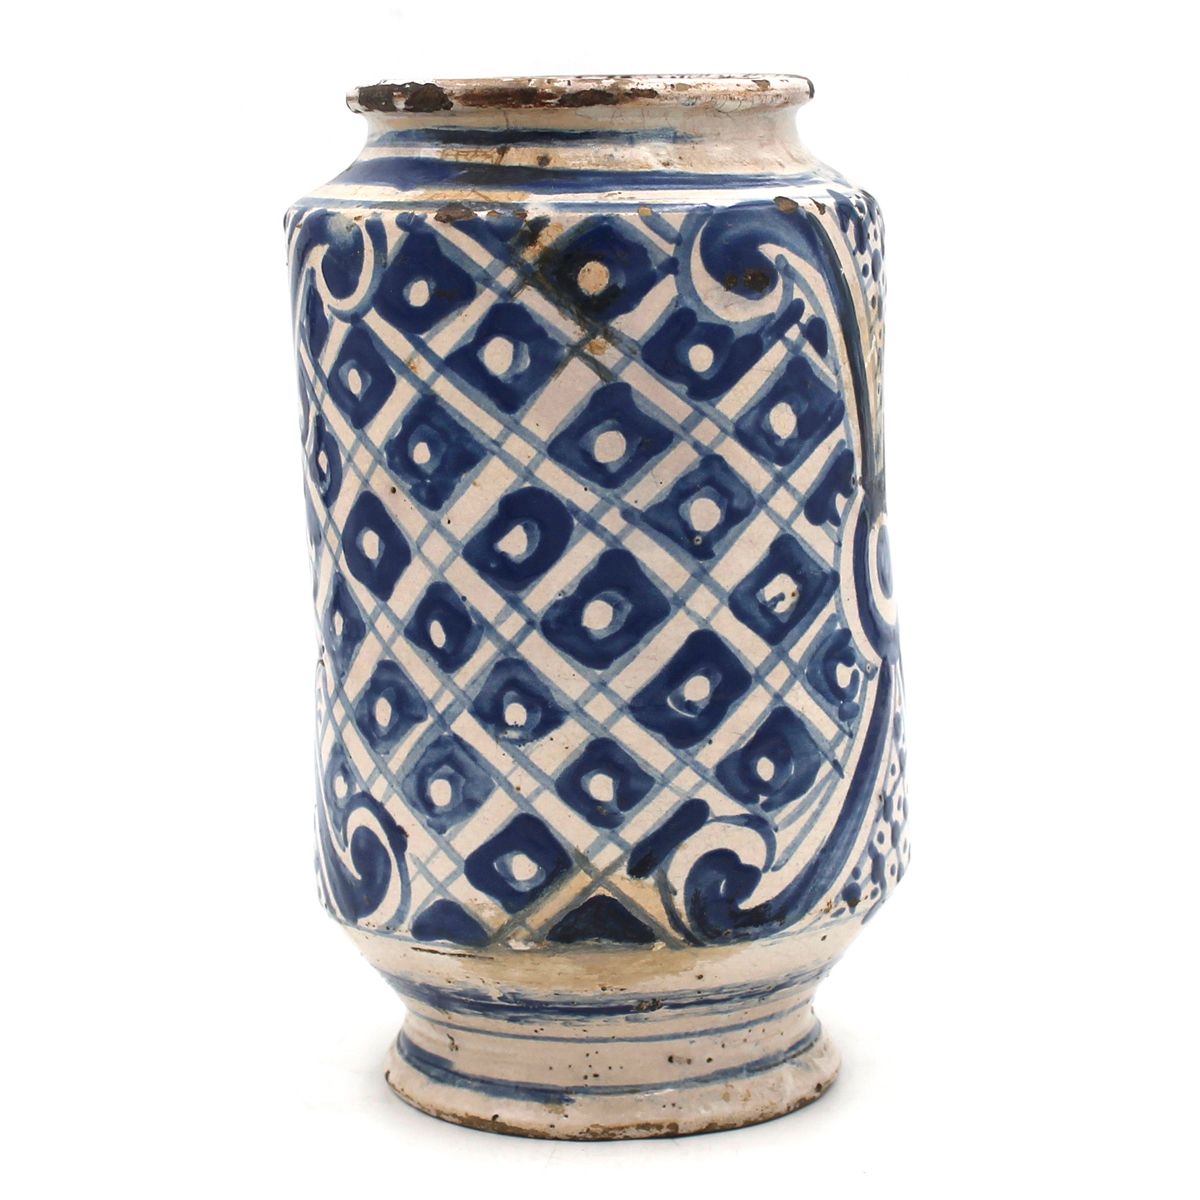 CILINDRO - CYLINDER Antique majolica decorated with geometric motifs in blue on &hellip;